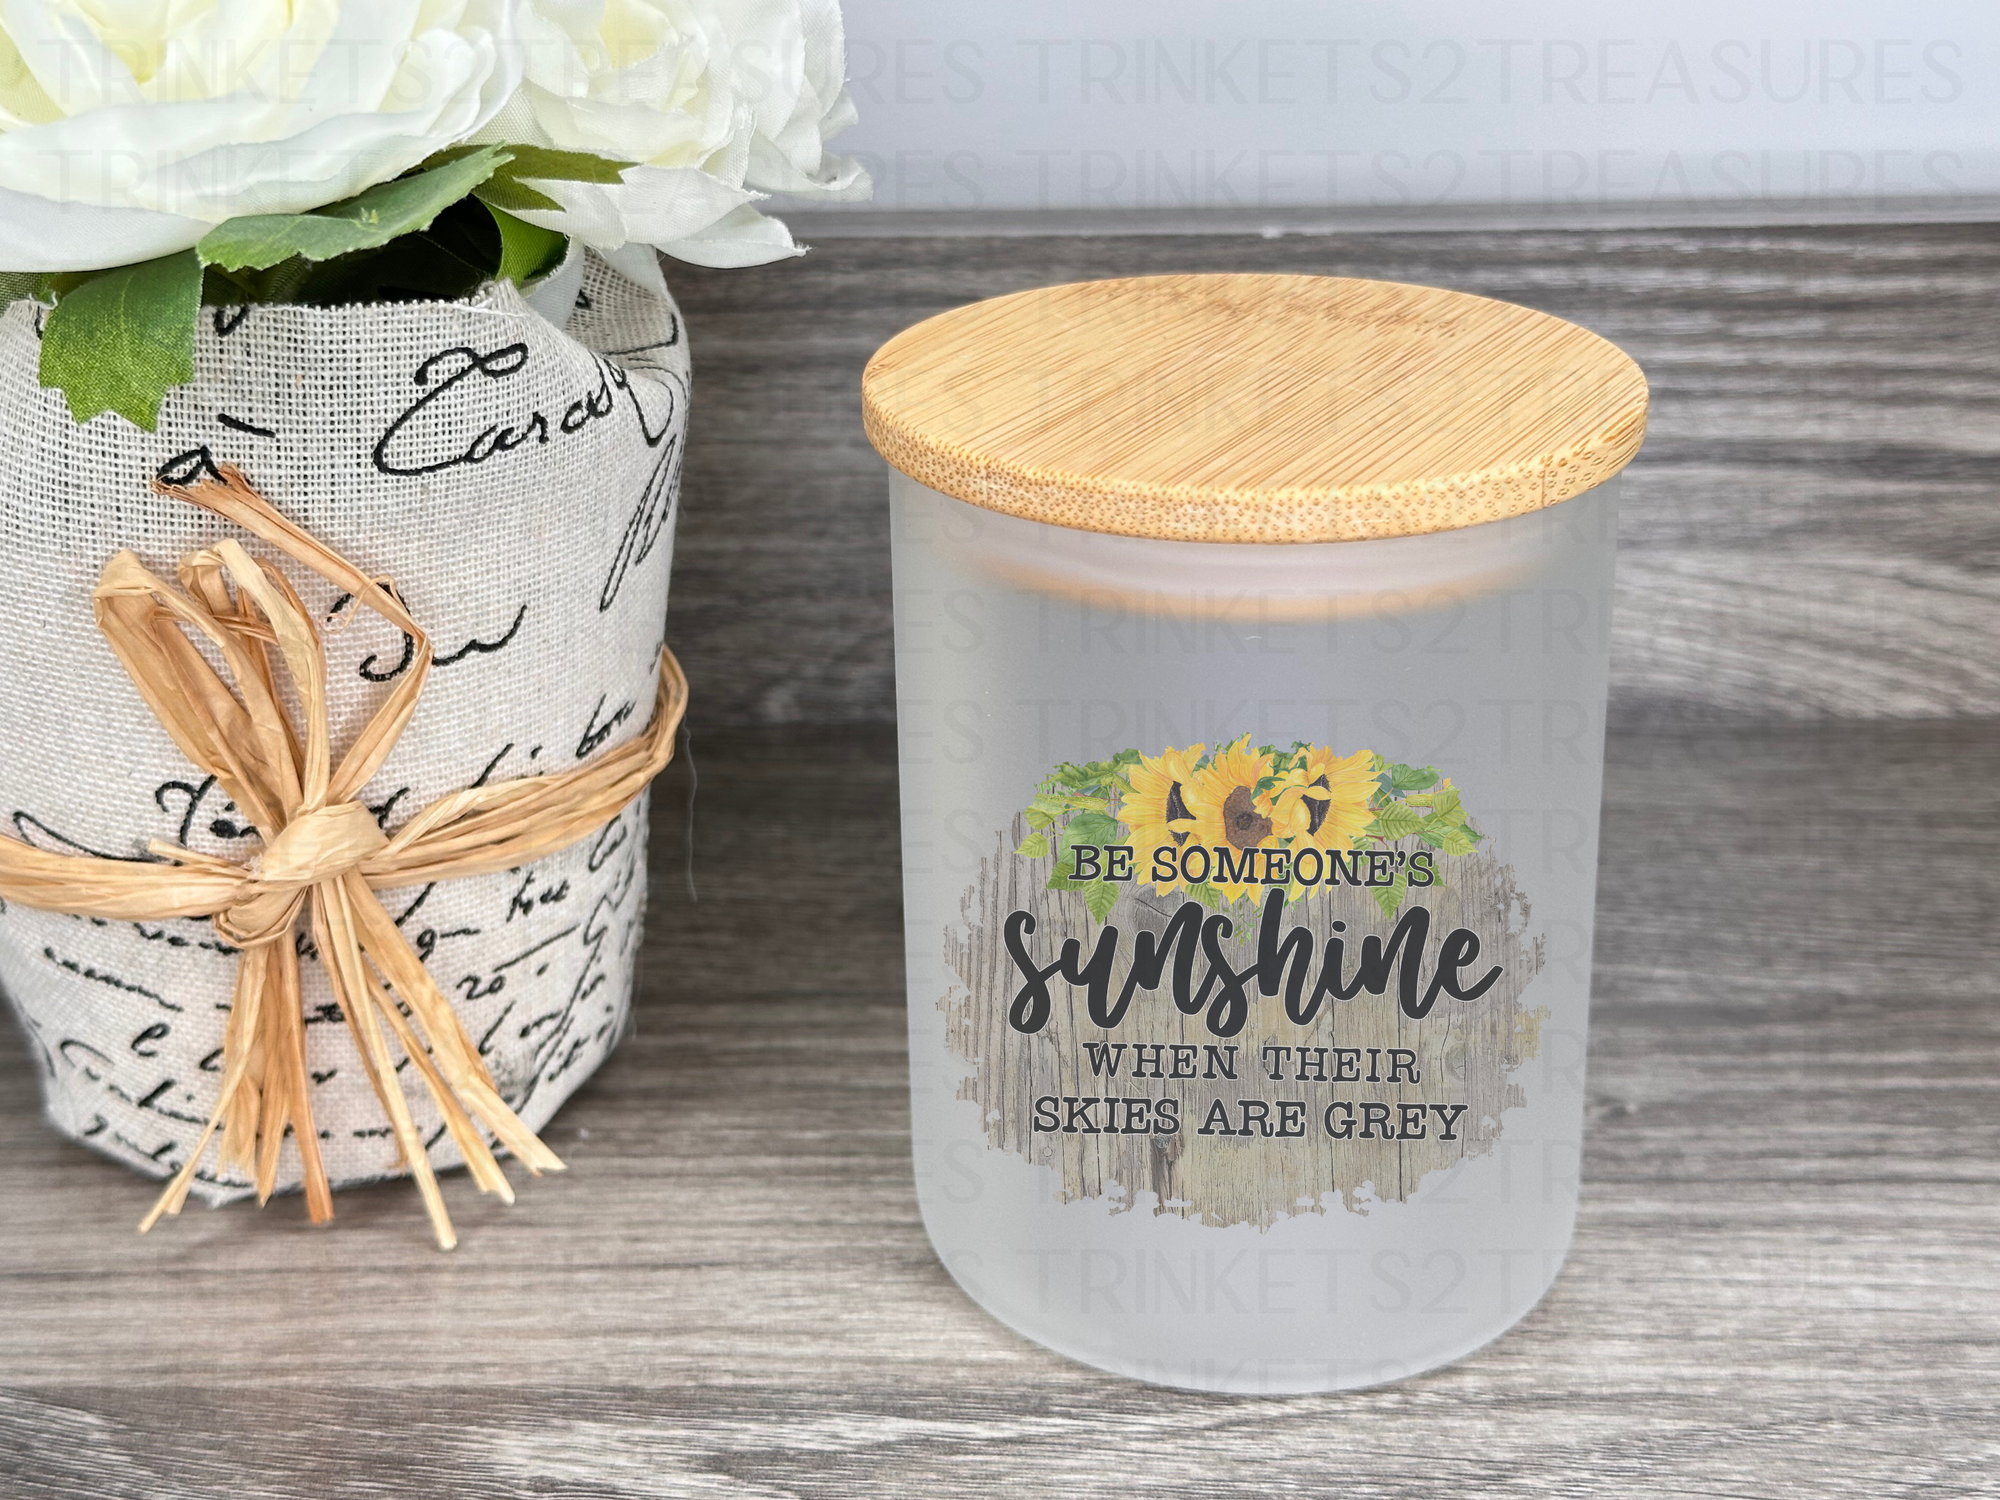 10 oz Frosted Candle Jars with Bamboo Lid/Multi-Purpose Jar/Be Someone's Sunshine/#520